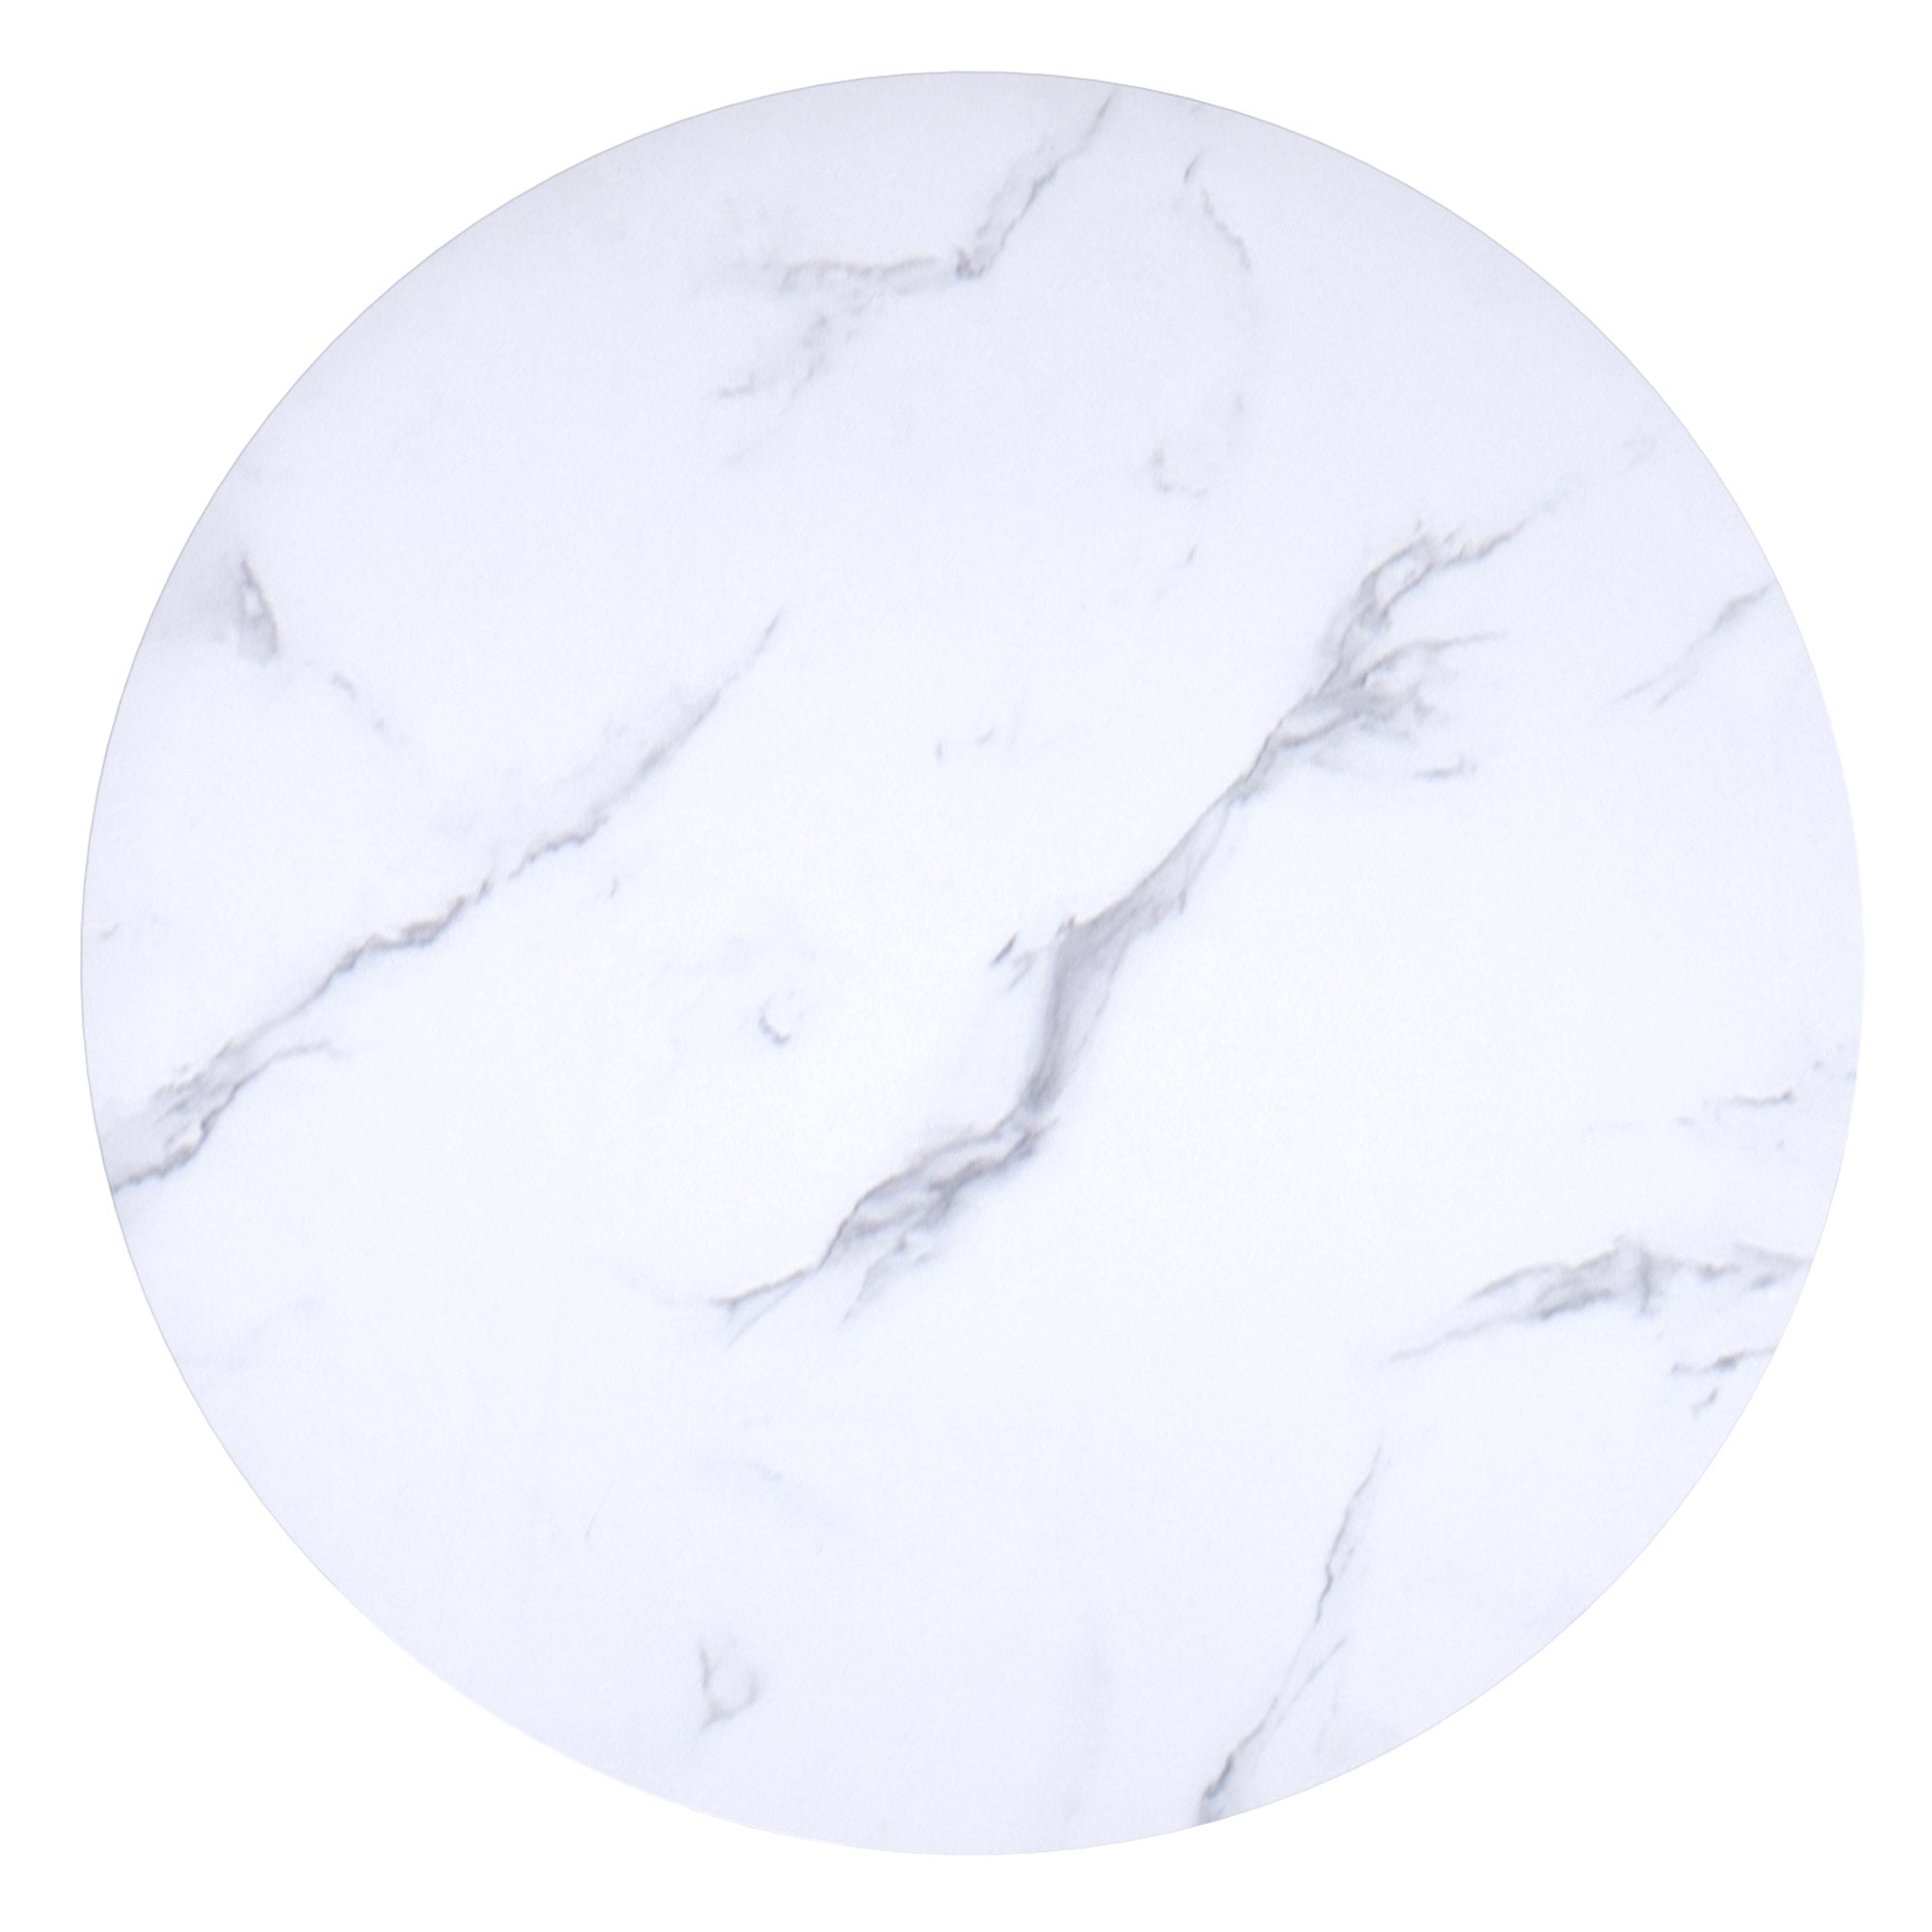 Zilo 48" Round Dining Table in White Faux Marble and Black 201-671BK_L